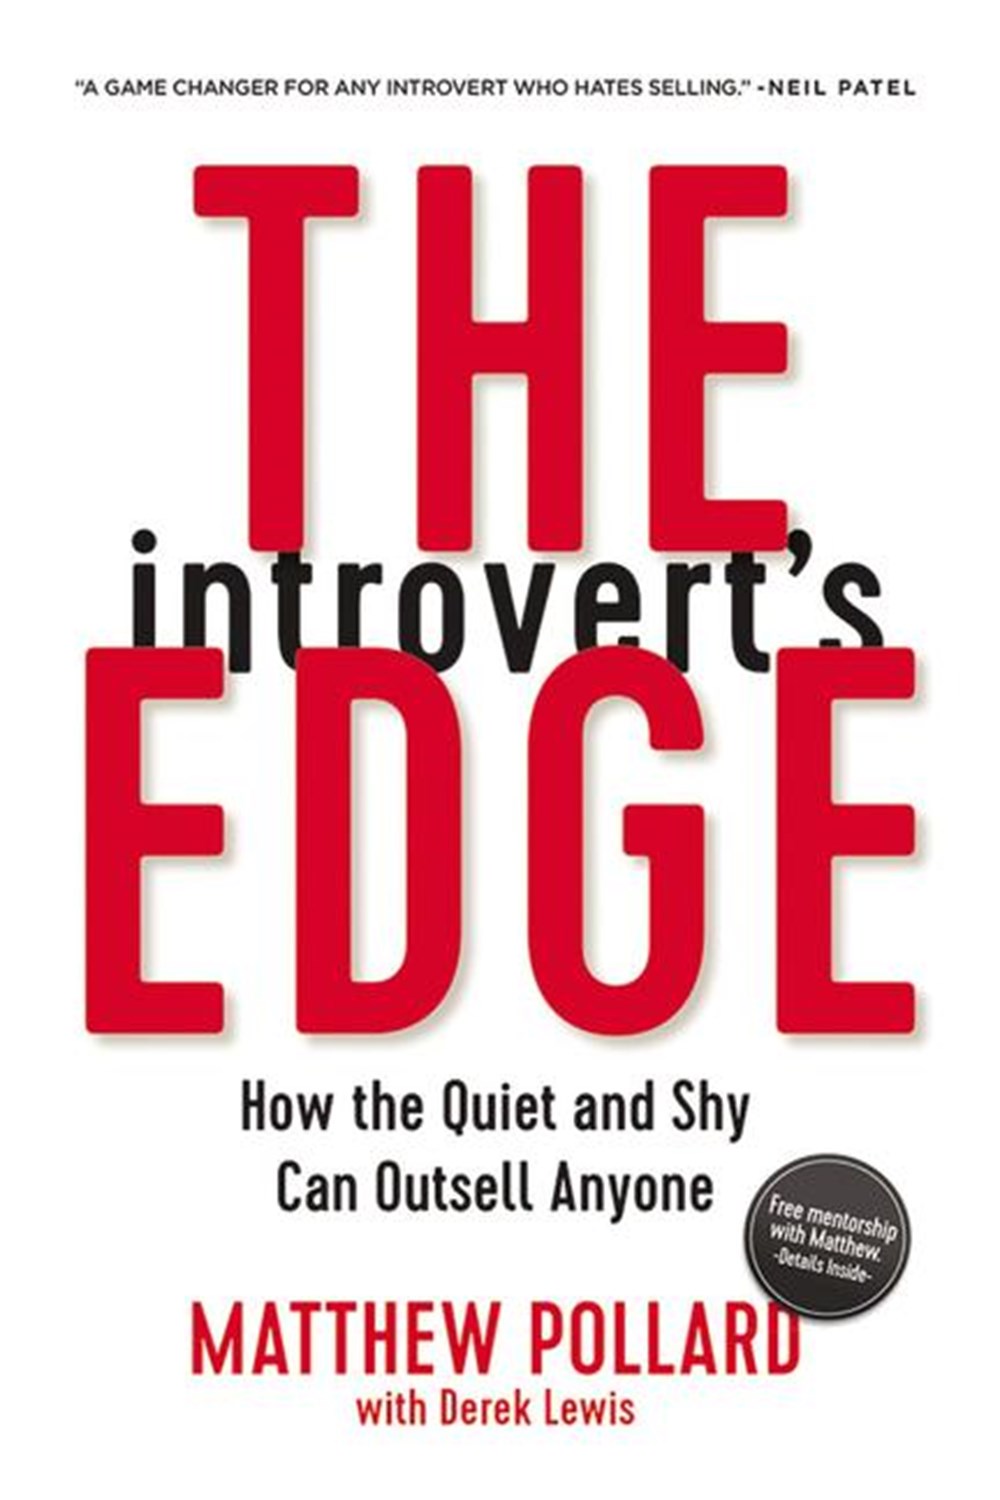 Introvert's Edge How the Quiet and Shy Can Outsell Anyone